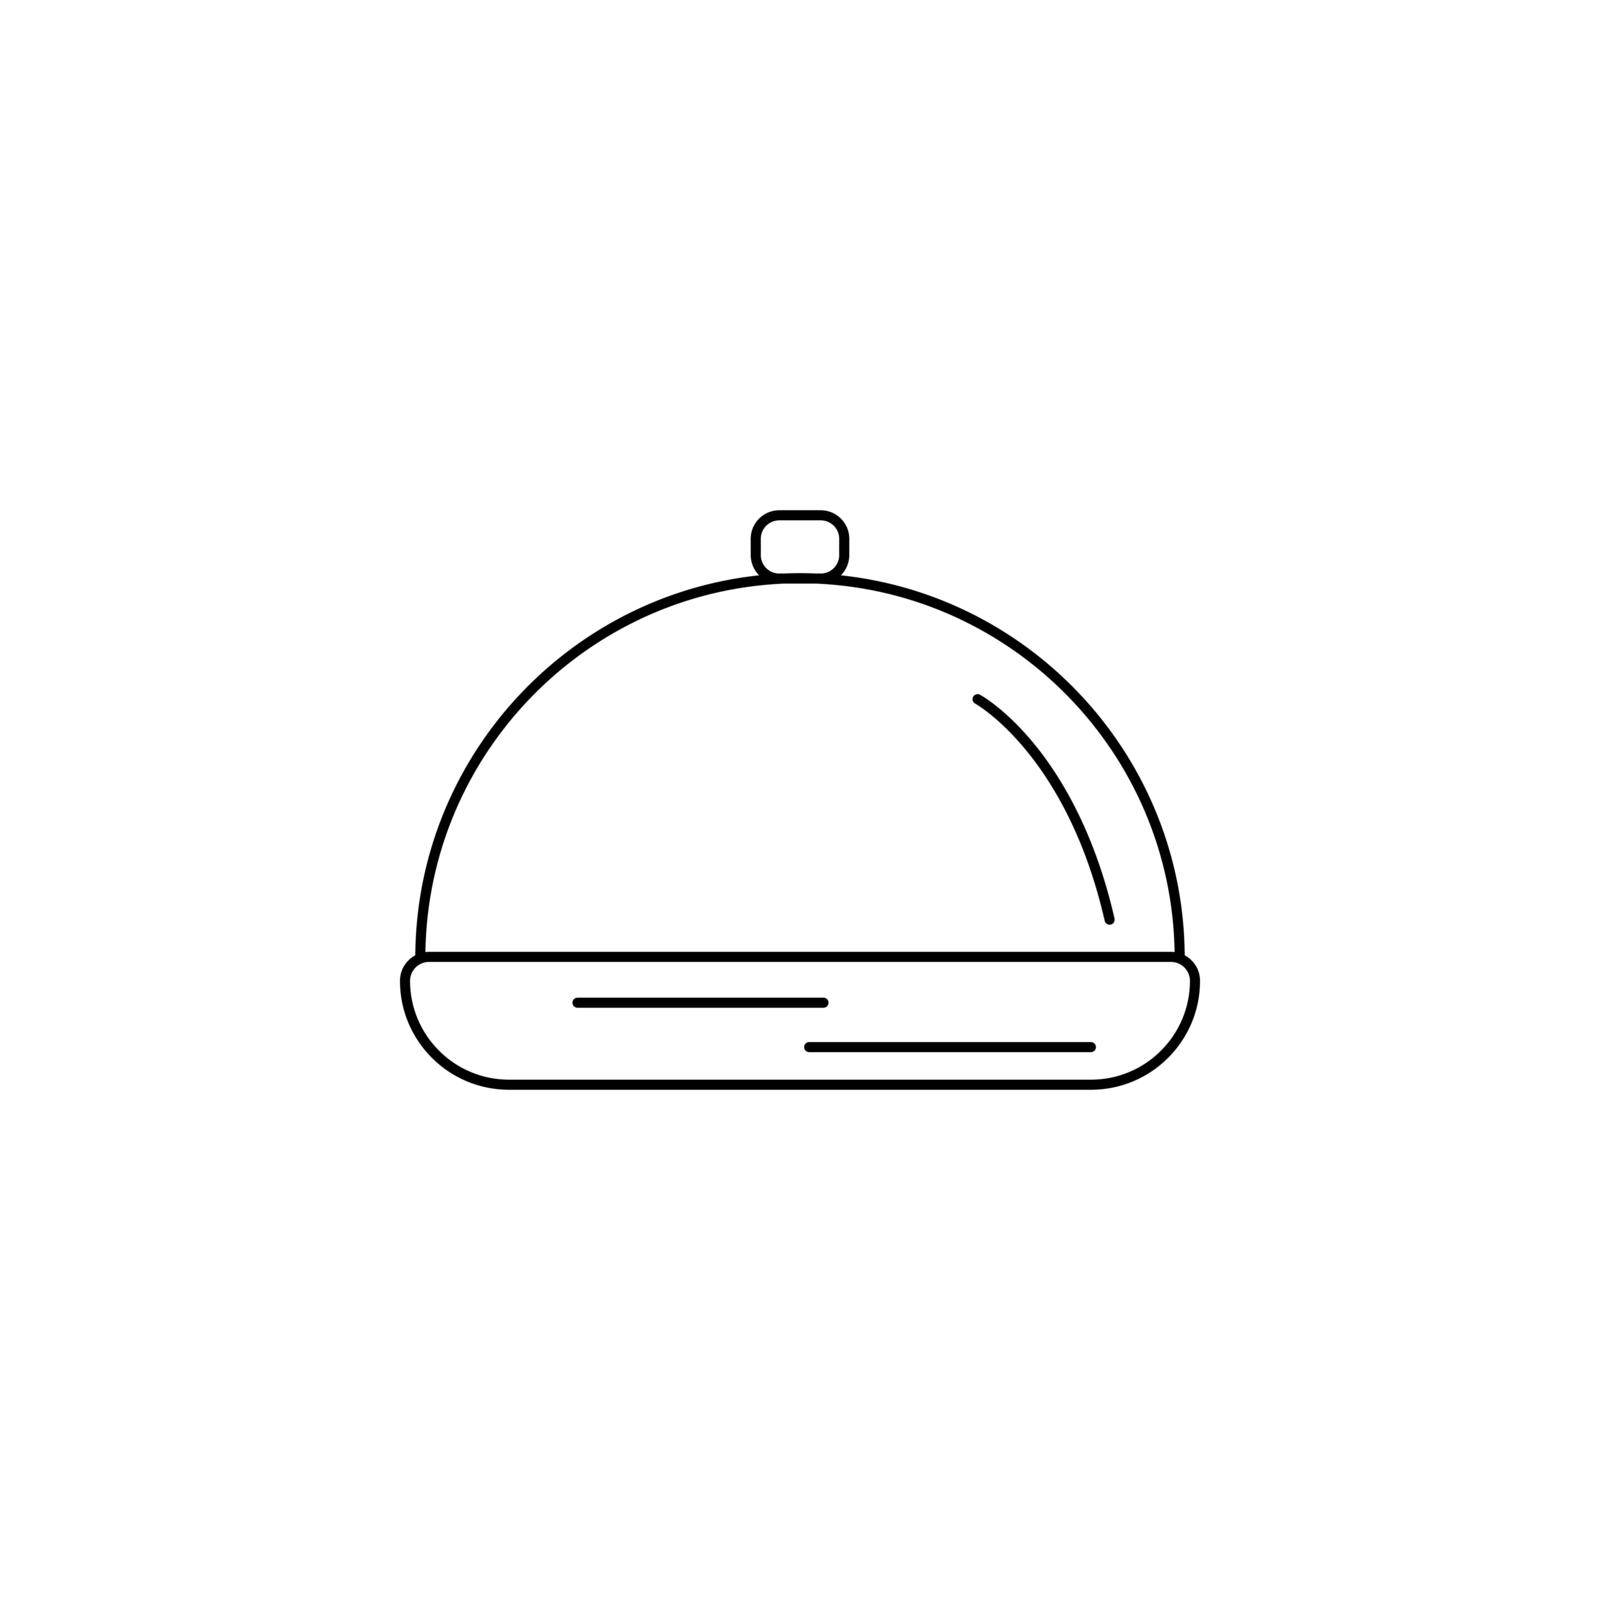 Dishes closed with cap line icon. Simple black outline kitchen container isolated vector. Accessory logo kitchen utensils. Web element kitchen and cooking